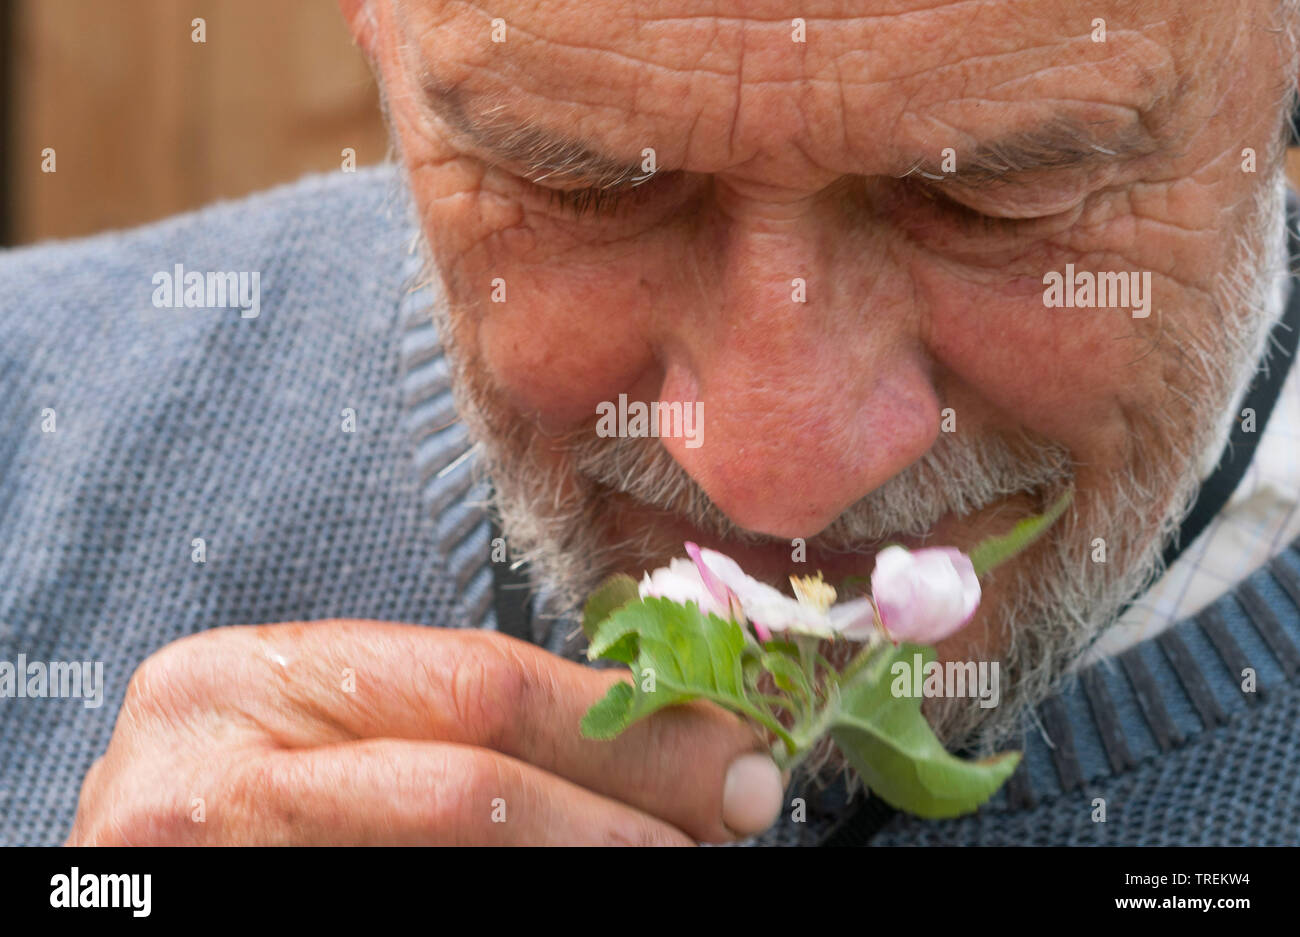 apple tree (Malus domestica), man smelling at an apple blossom, Germany Stock Photo